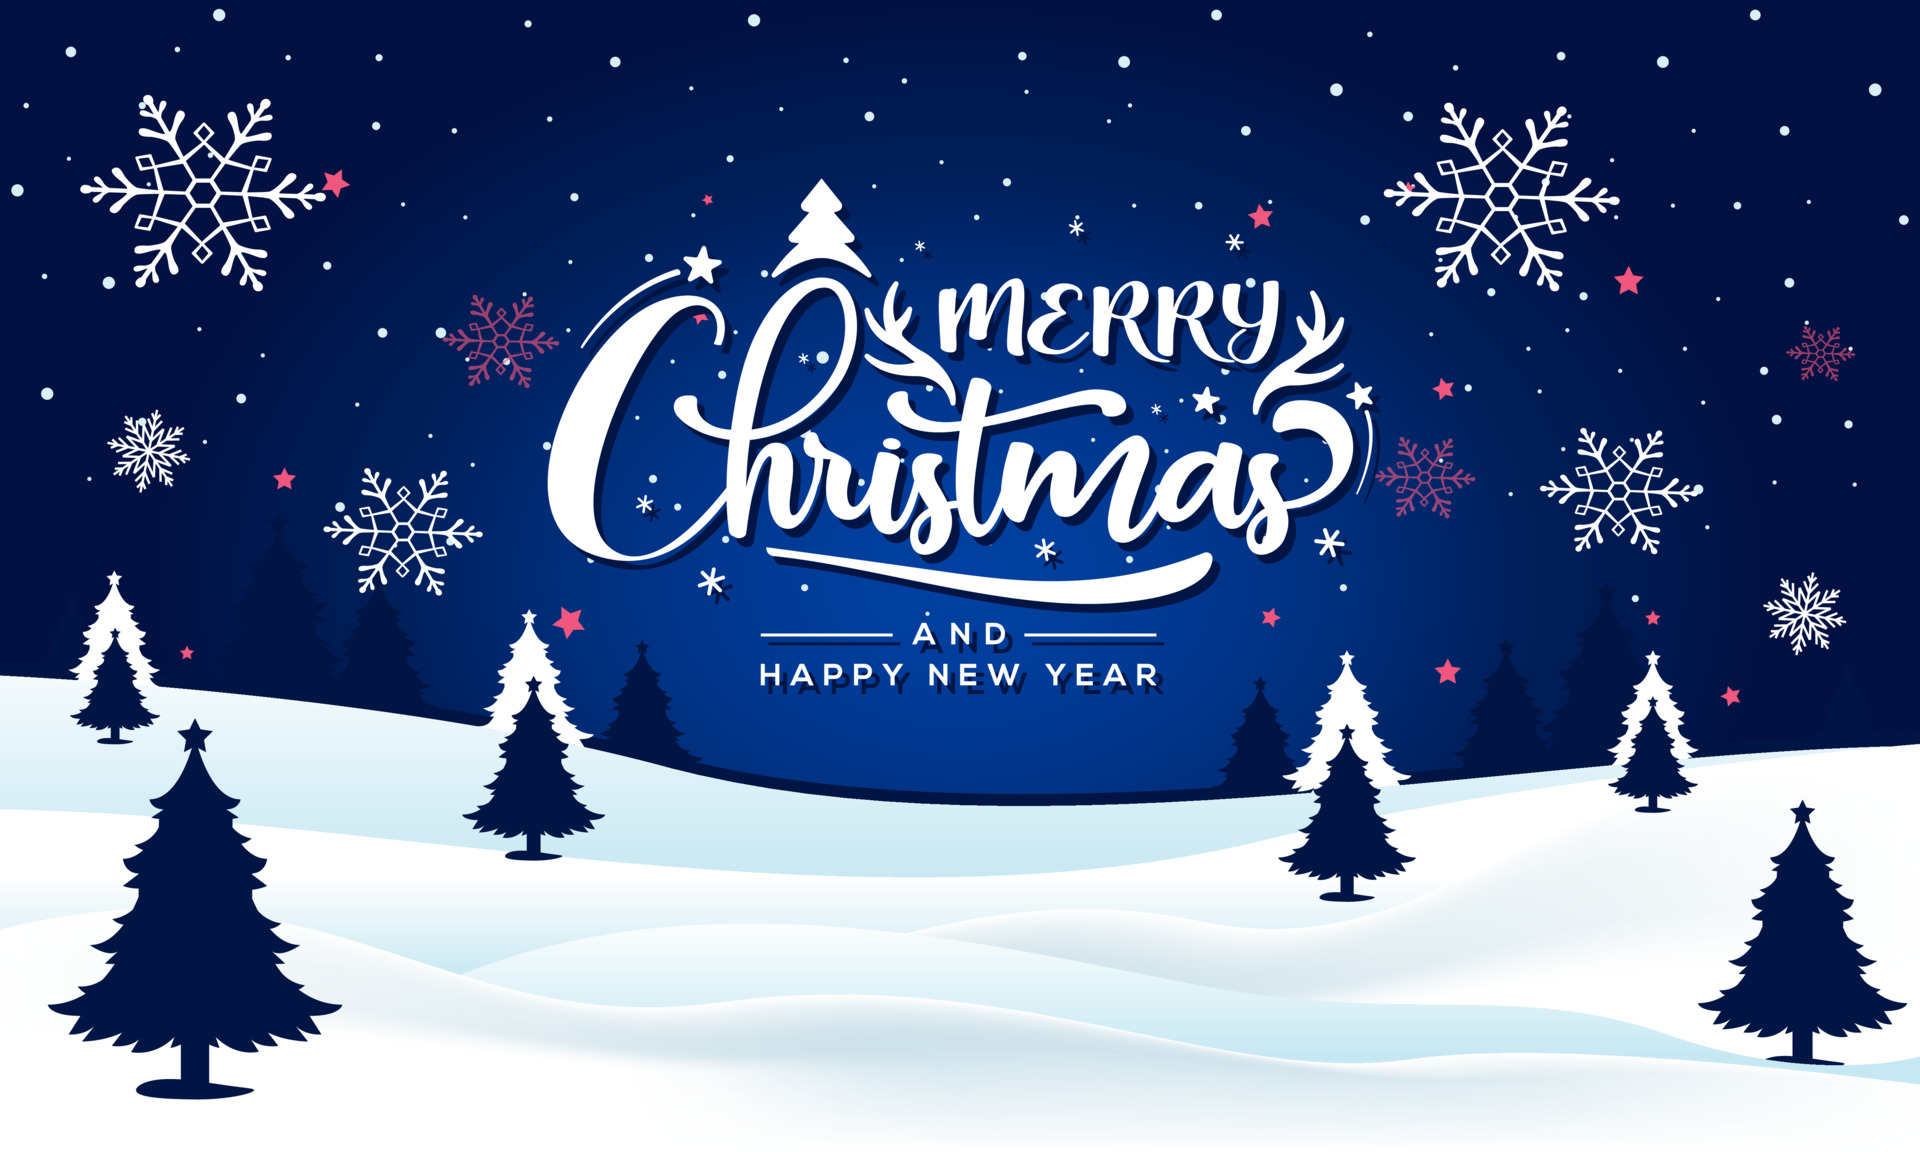 merry-christmas-and-new-year-typography-on-shiny-xmas-background-with-winter-landscape-with-snowflakes-light-stars-merry-christmas-card-free-vector.jpg